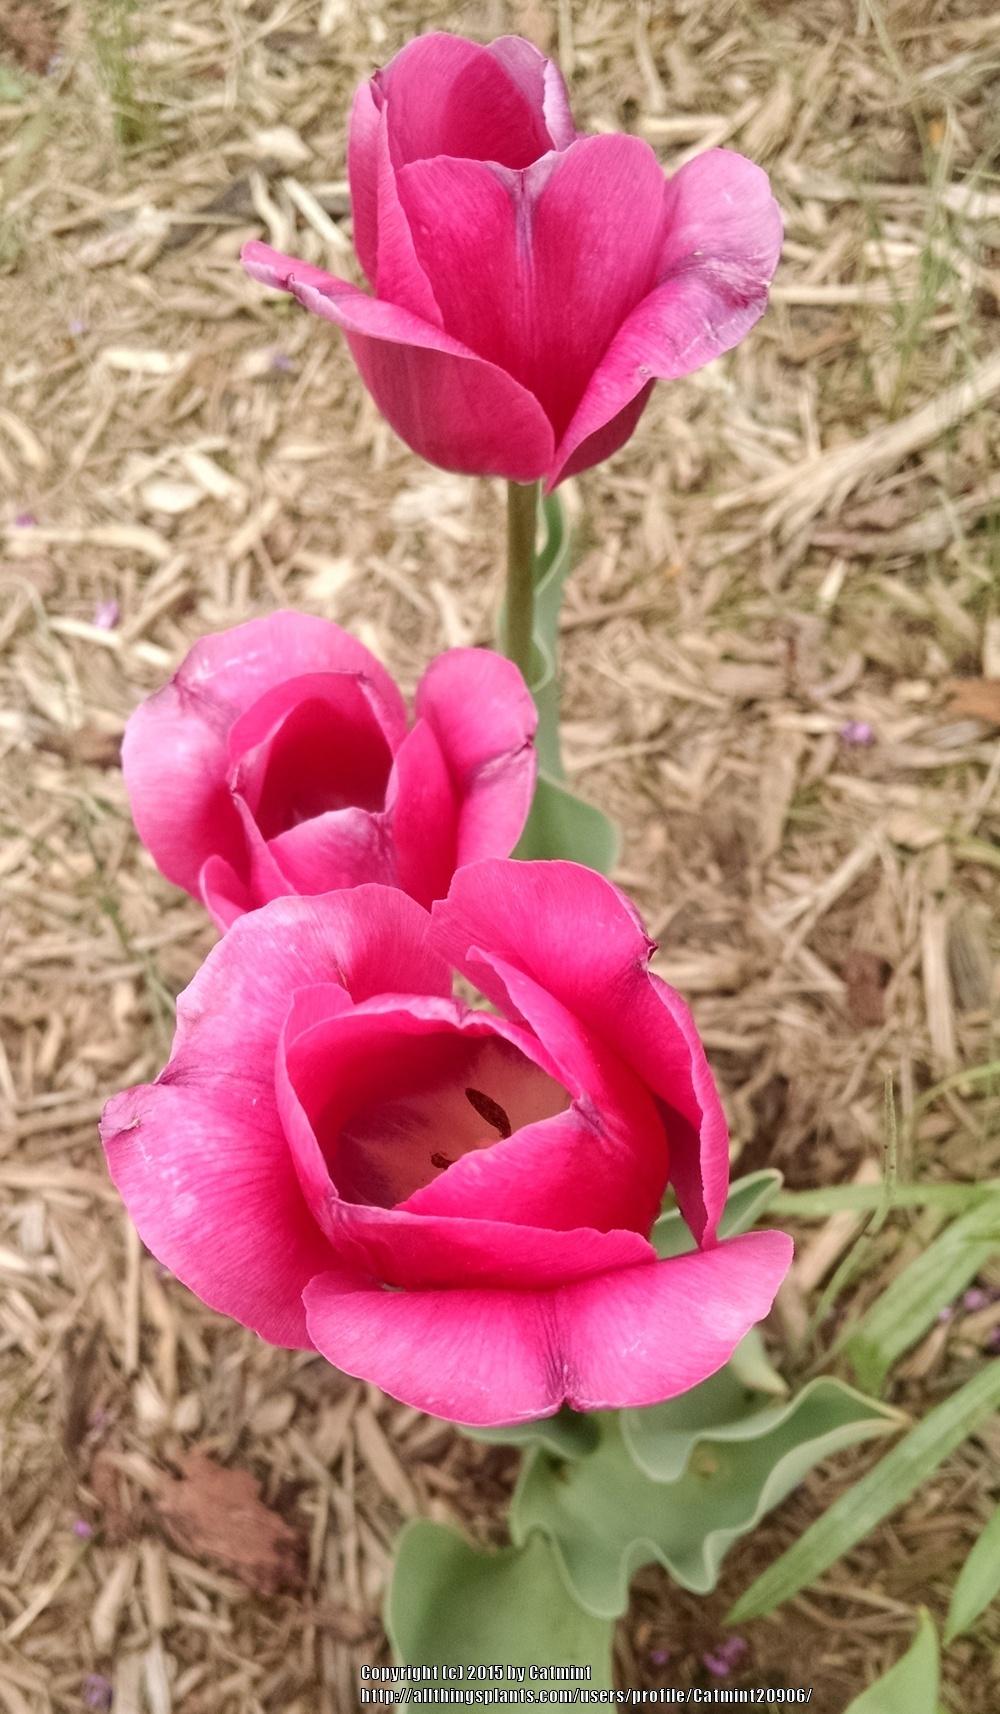 Photo of Tulips (Tulipa) uploaded by Catmint20906